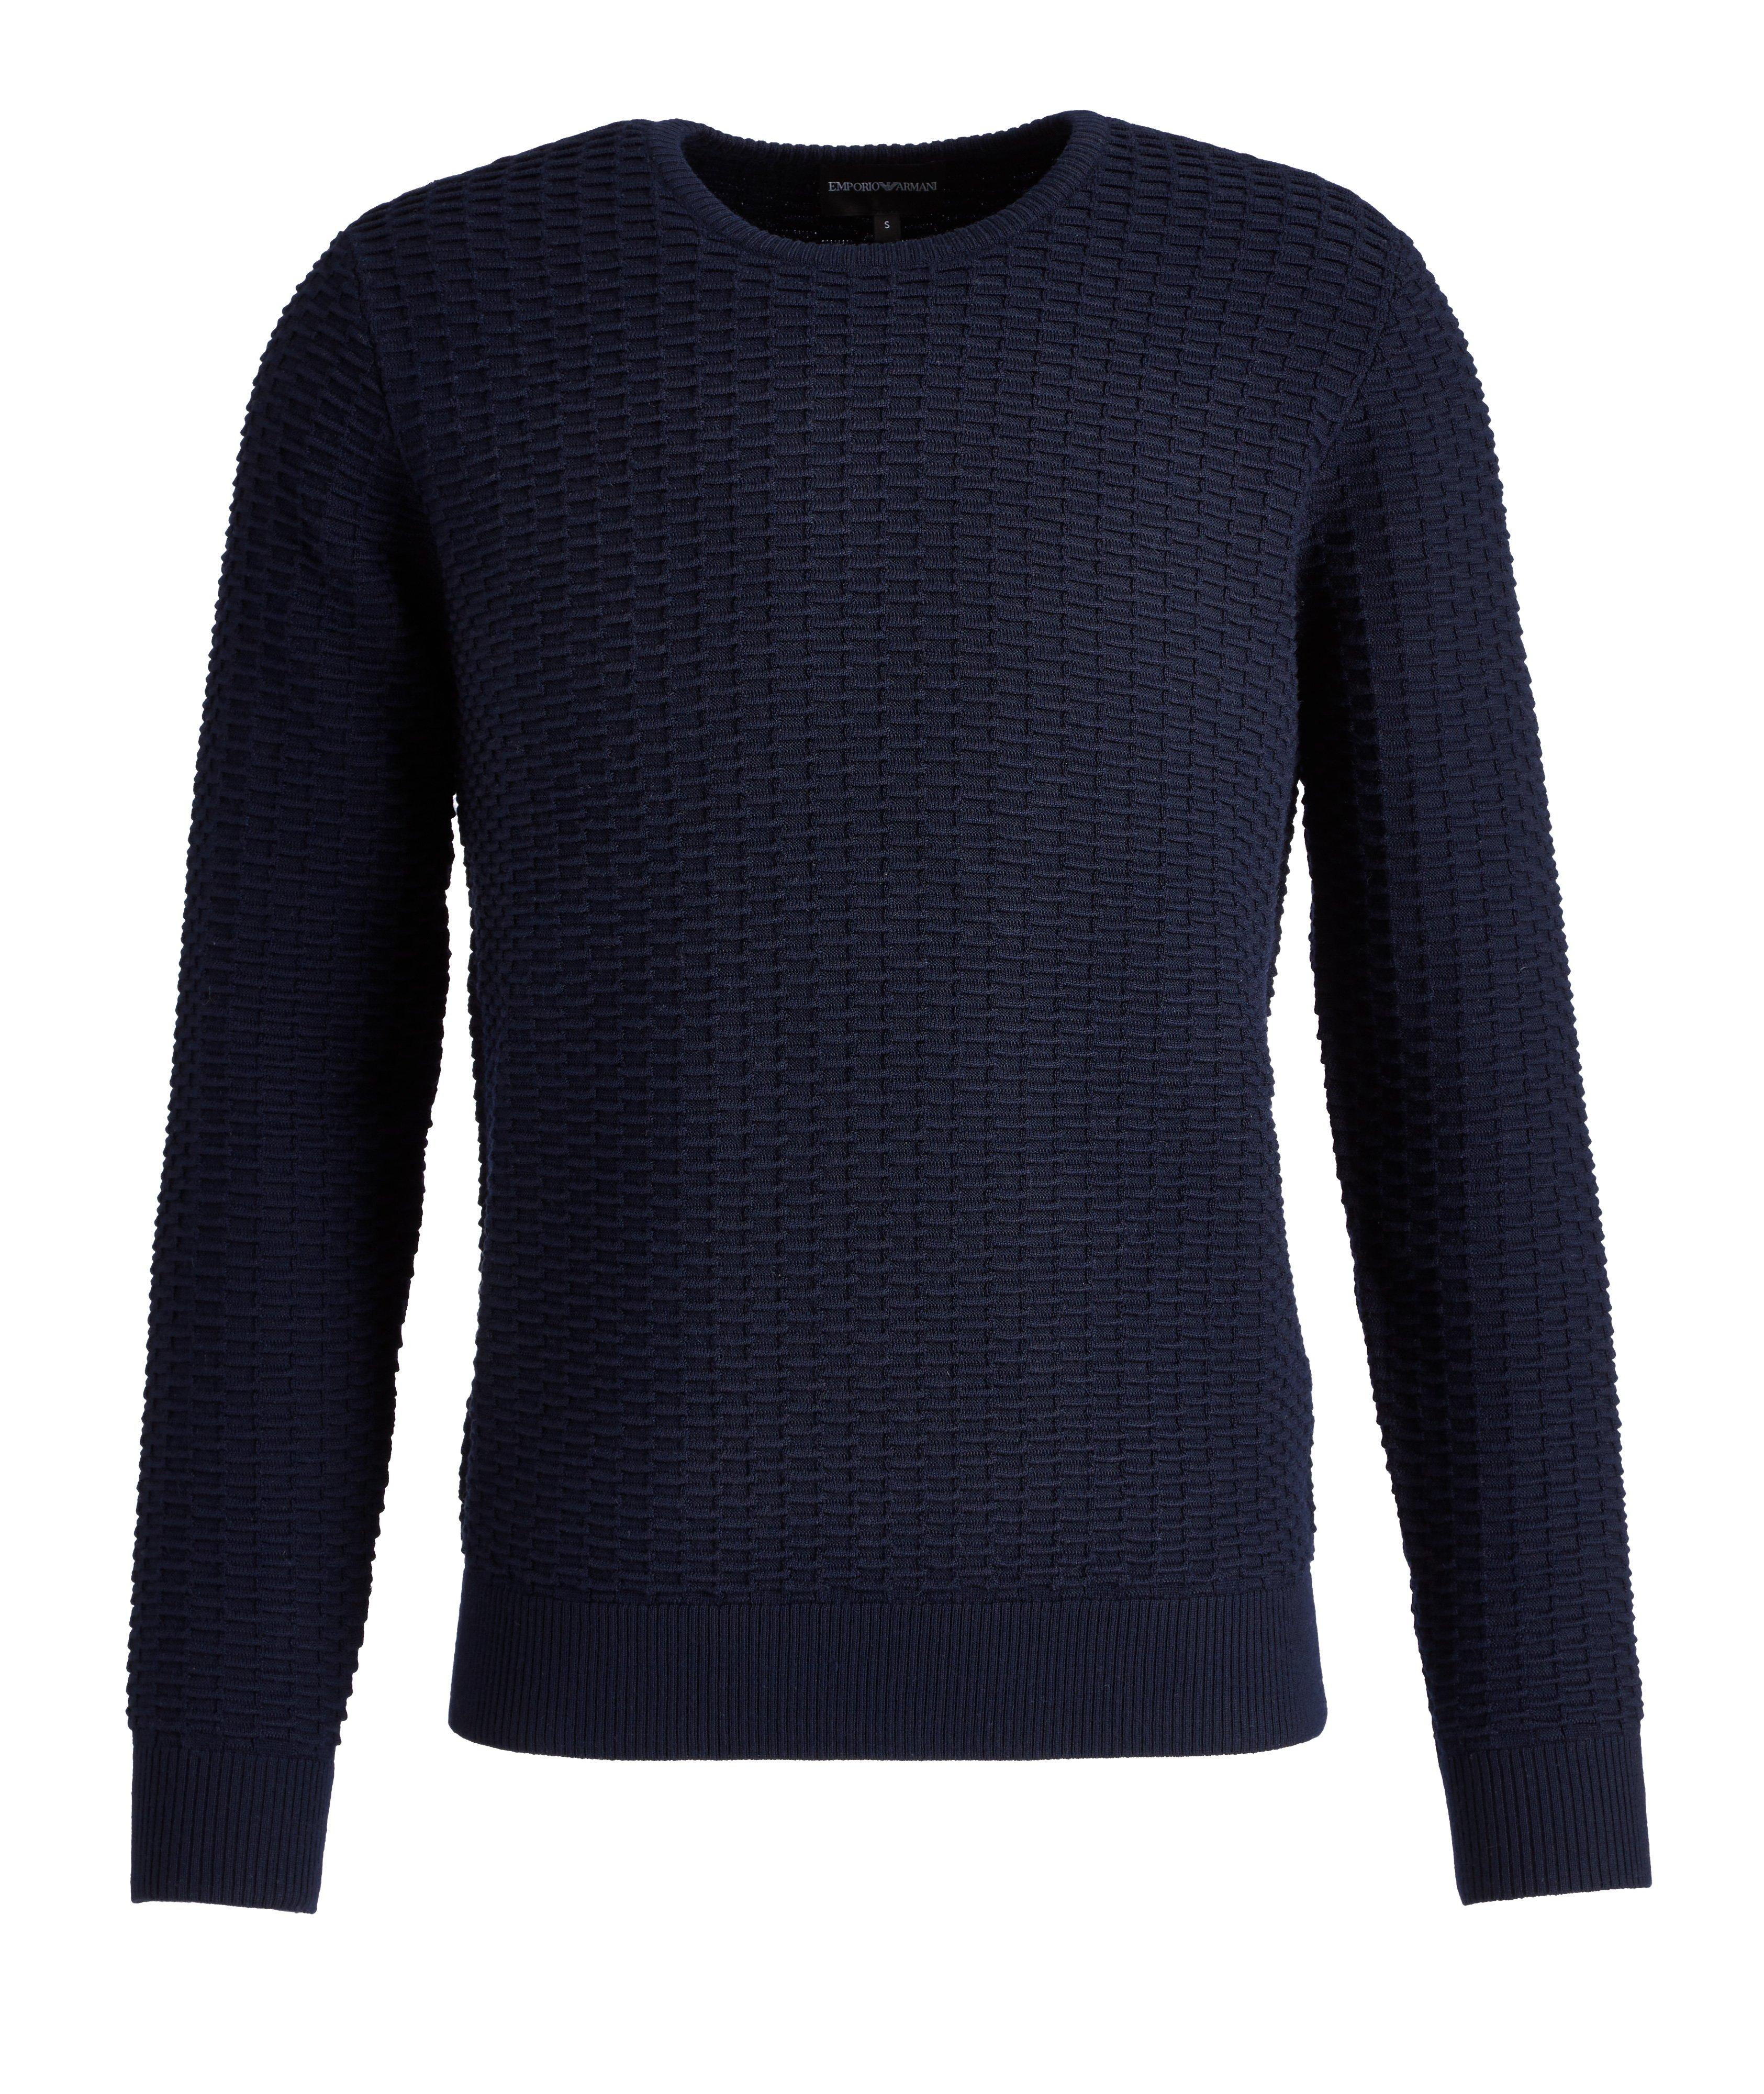 Textured Knit Wool-Blend Sweater image 0